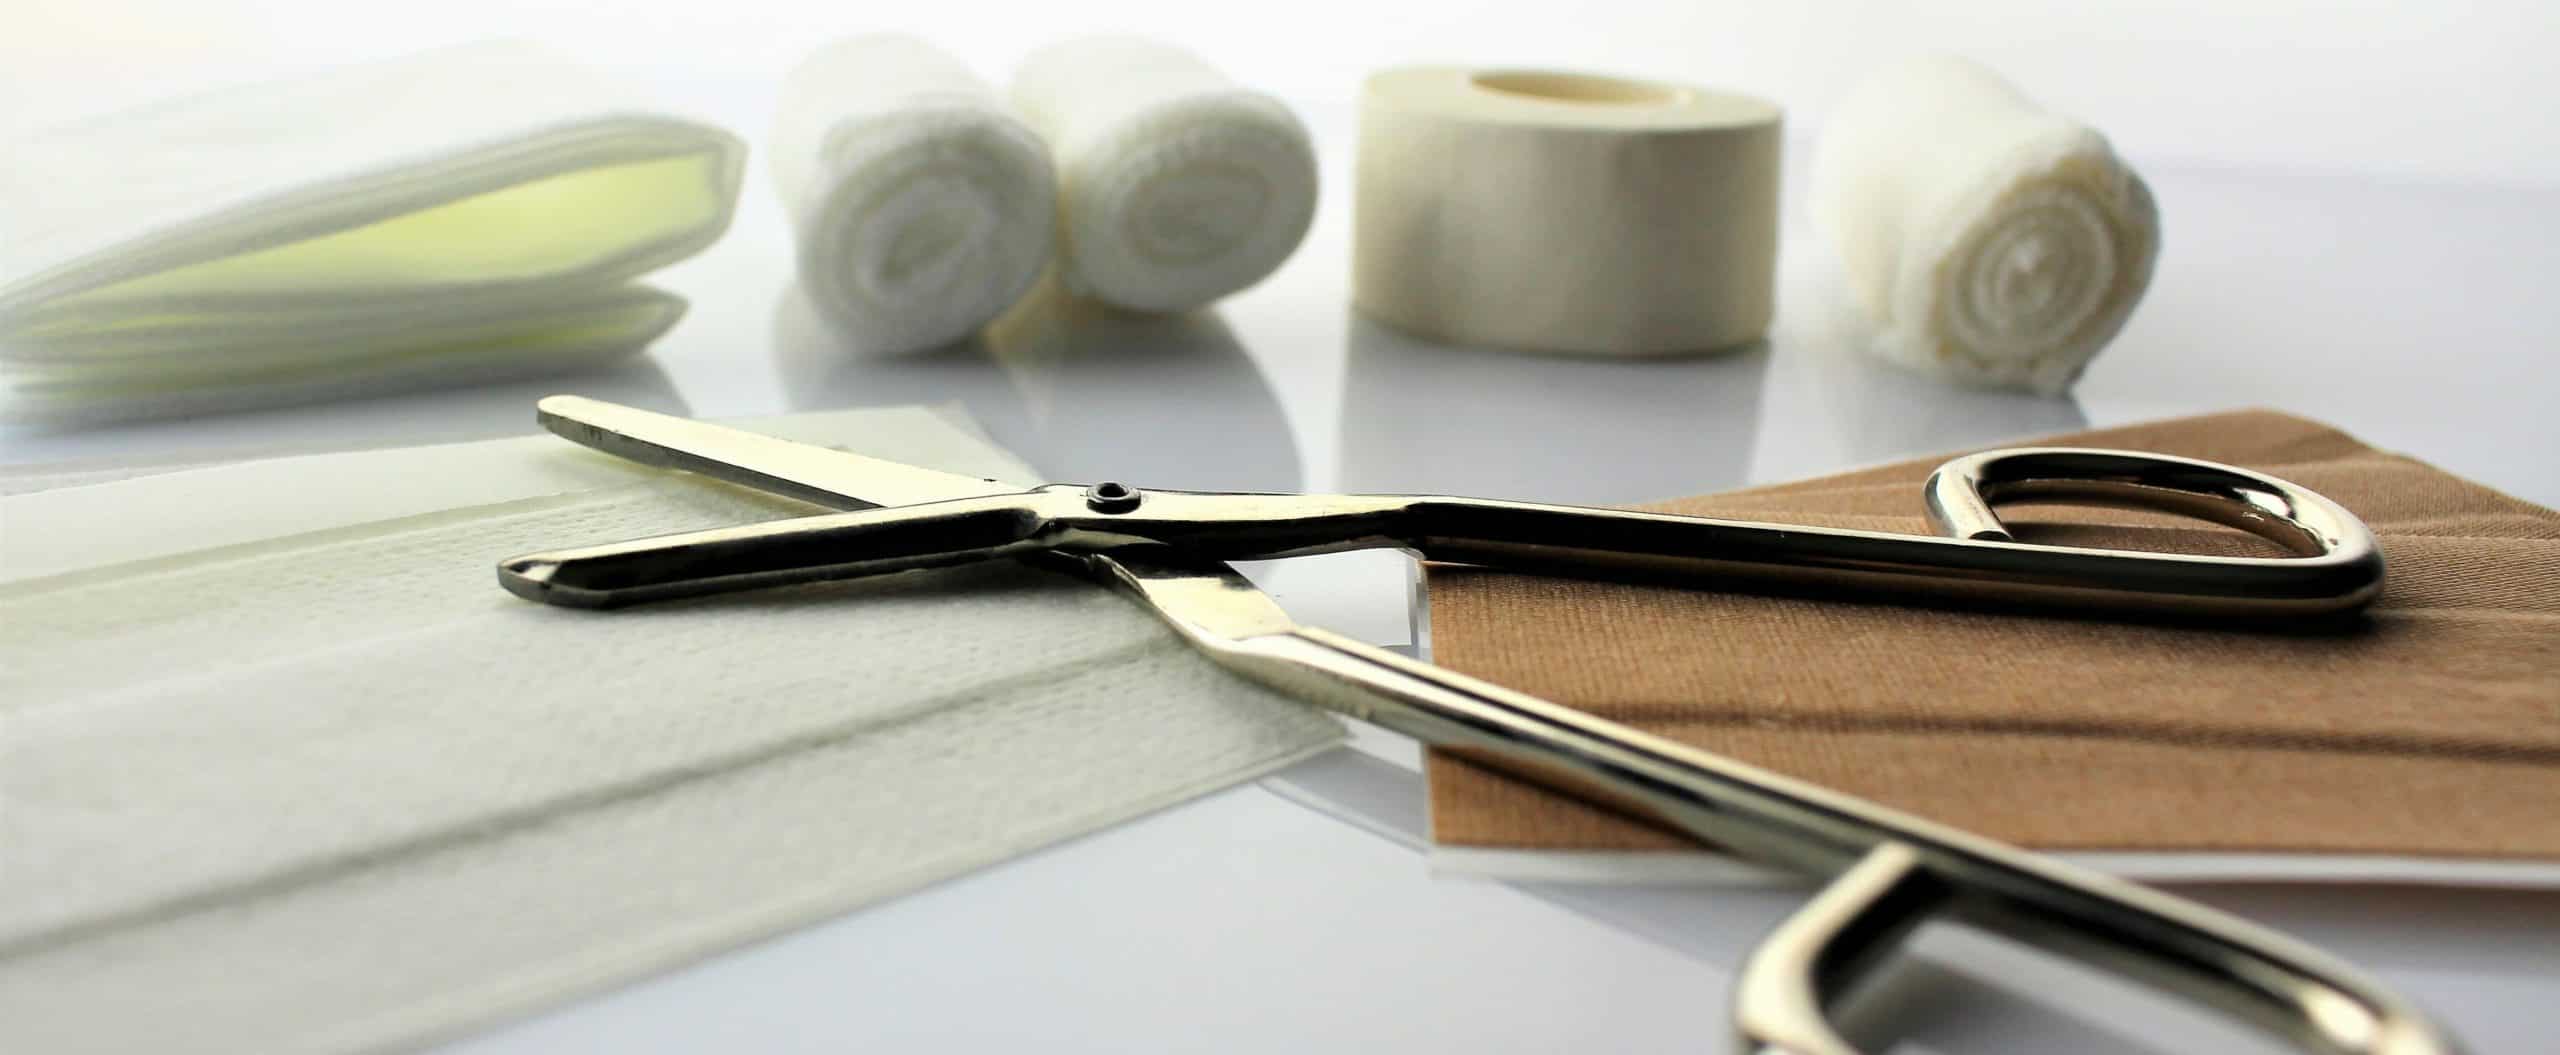 scissors, bandages, cotton balls, and medical tape for addiction wound care